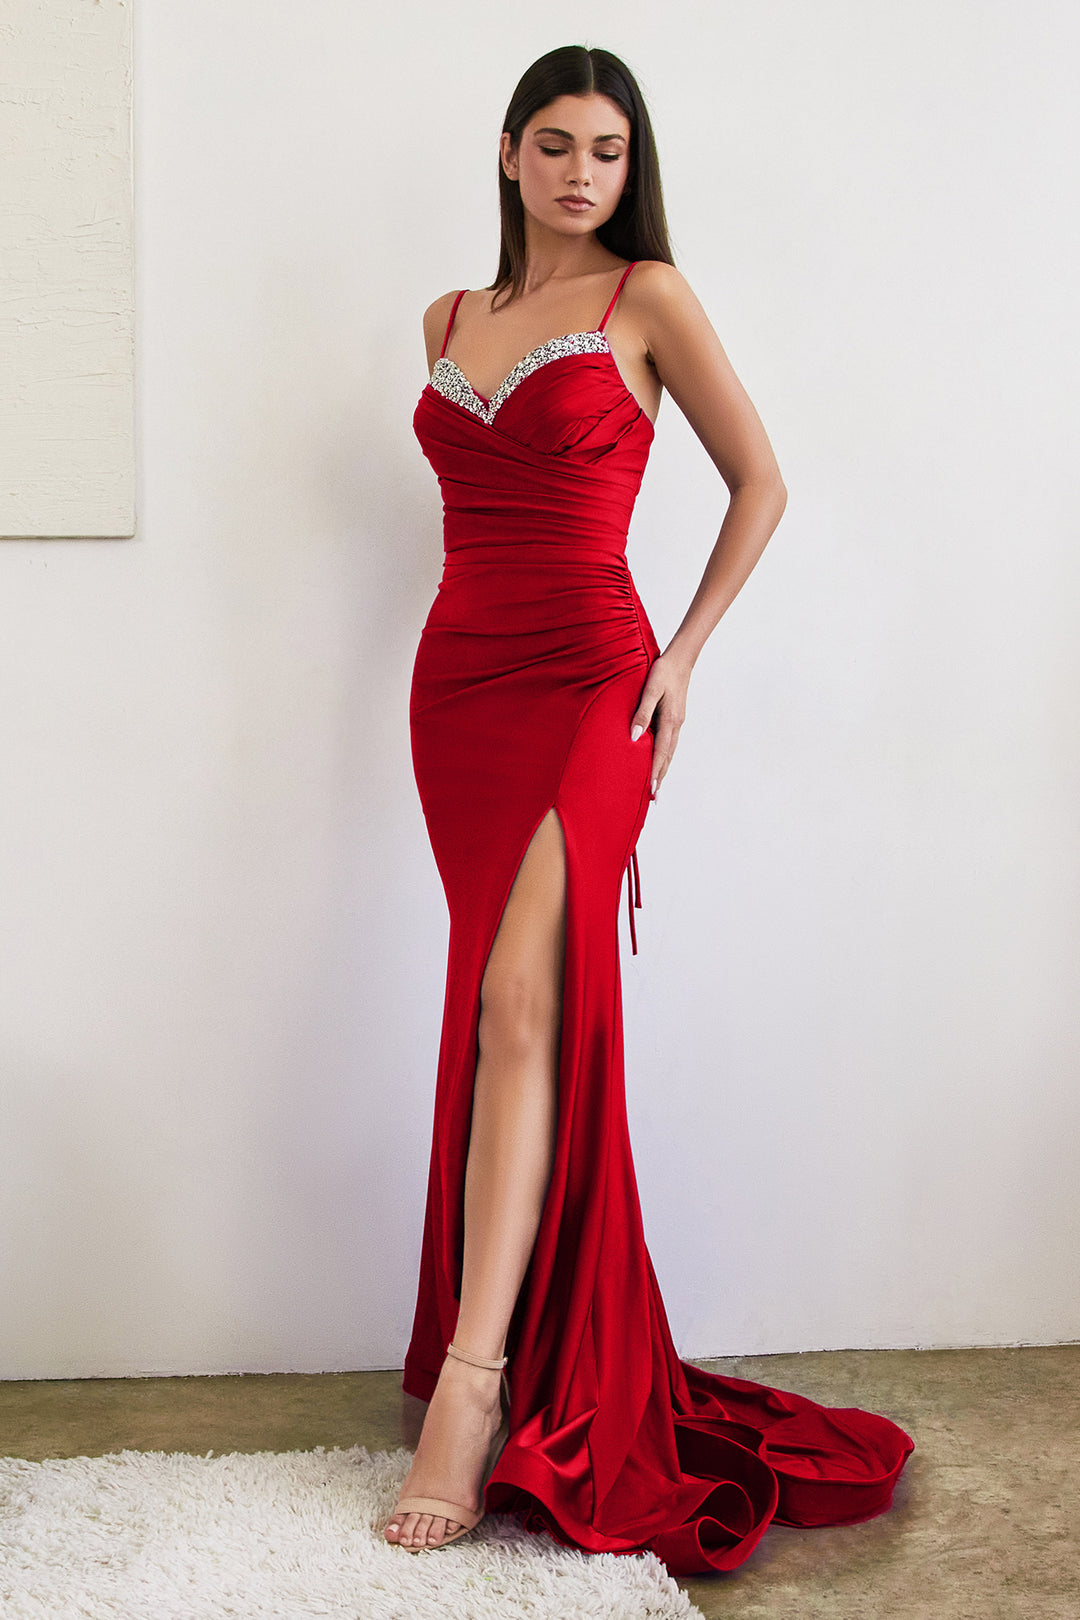 CINDERELLA DIVINE CD888 Fitted Beaded Stretch Satin Gown with Slit